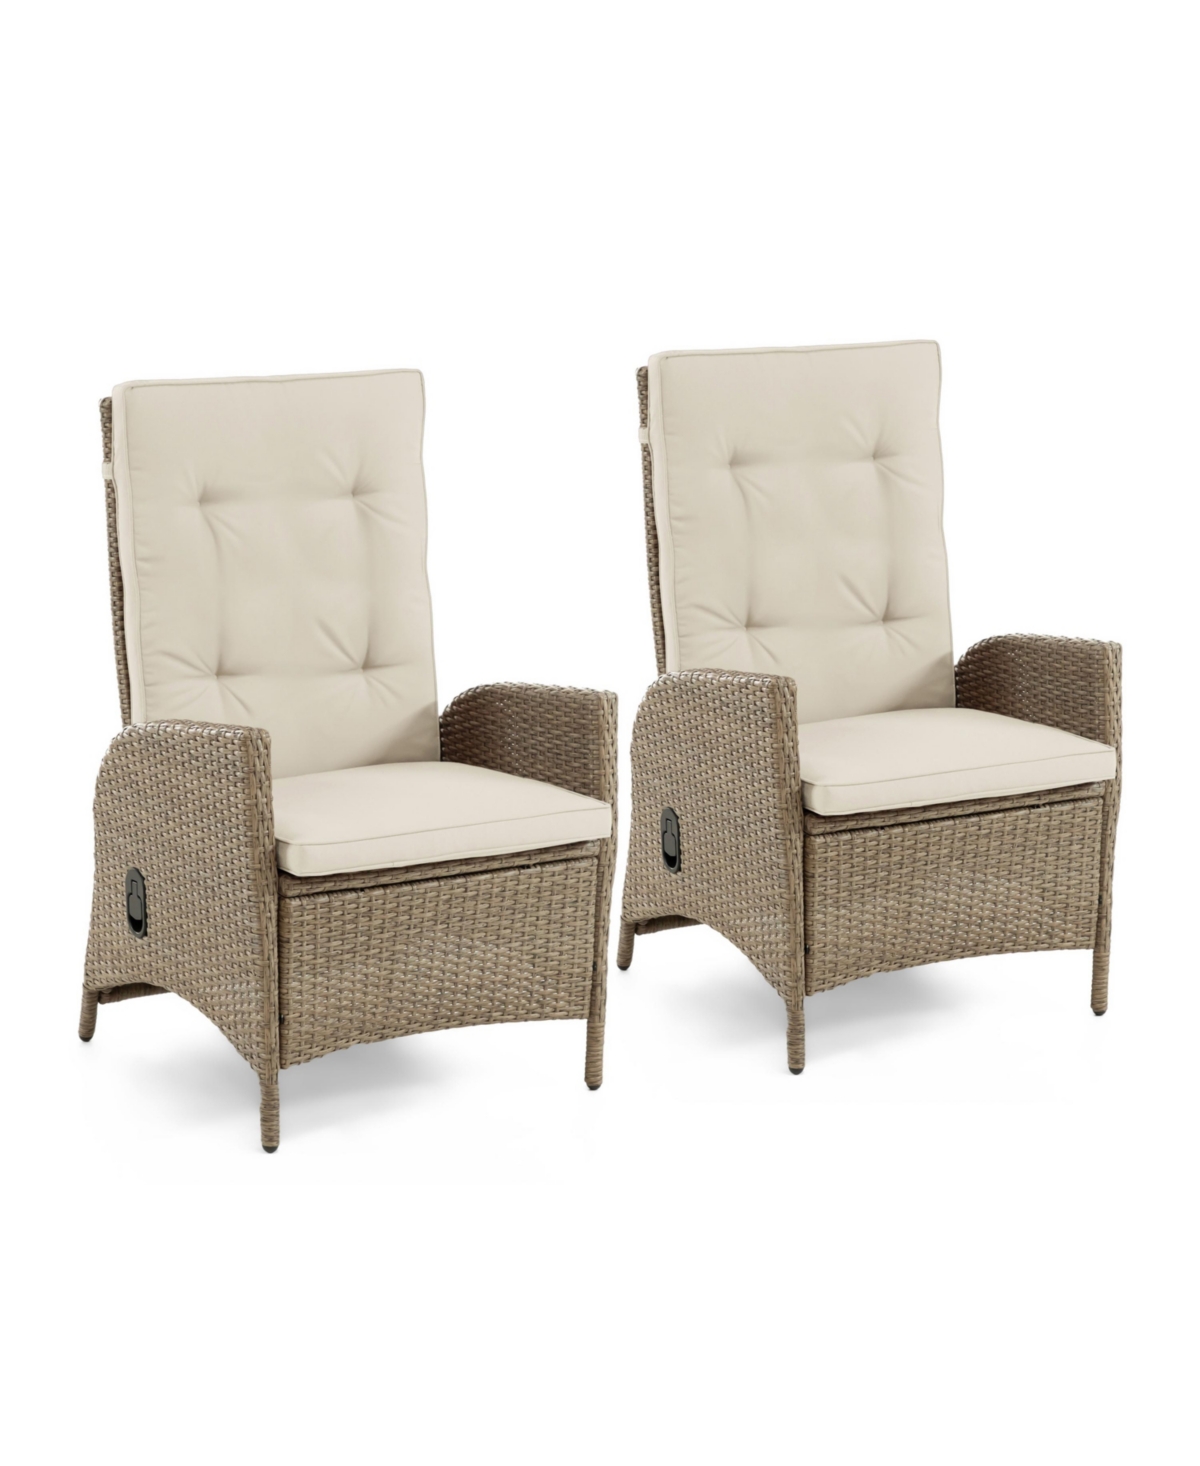 Furniture Of America 2 Piece Resin Wicker Outdoor Gas Spring Reclining Chairs With Cushions In Brown